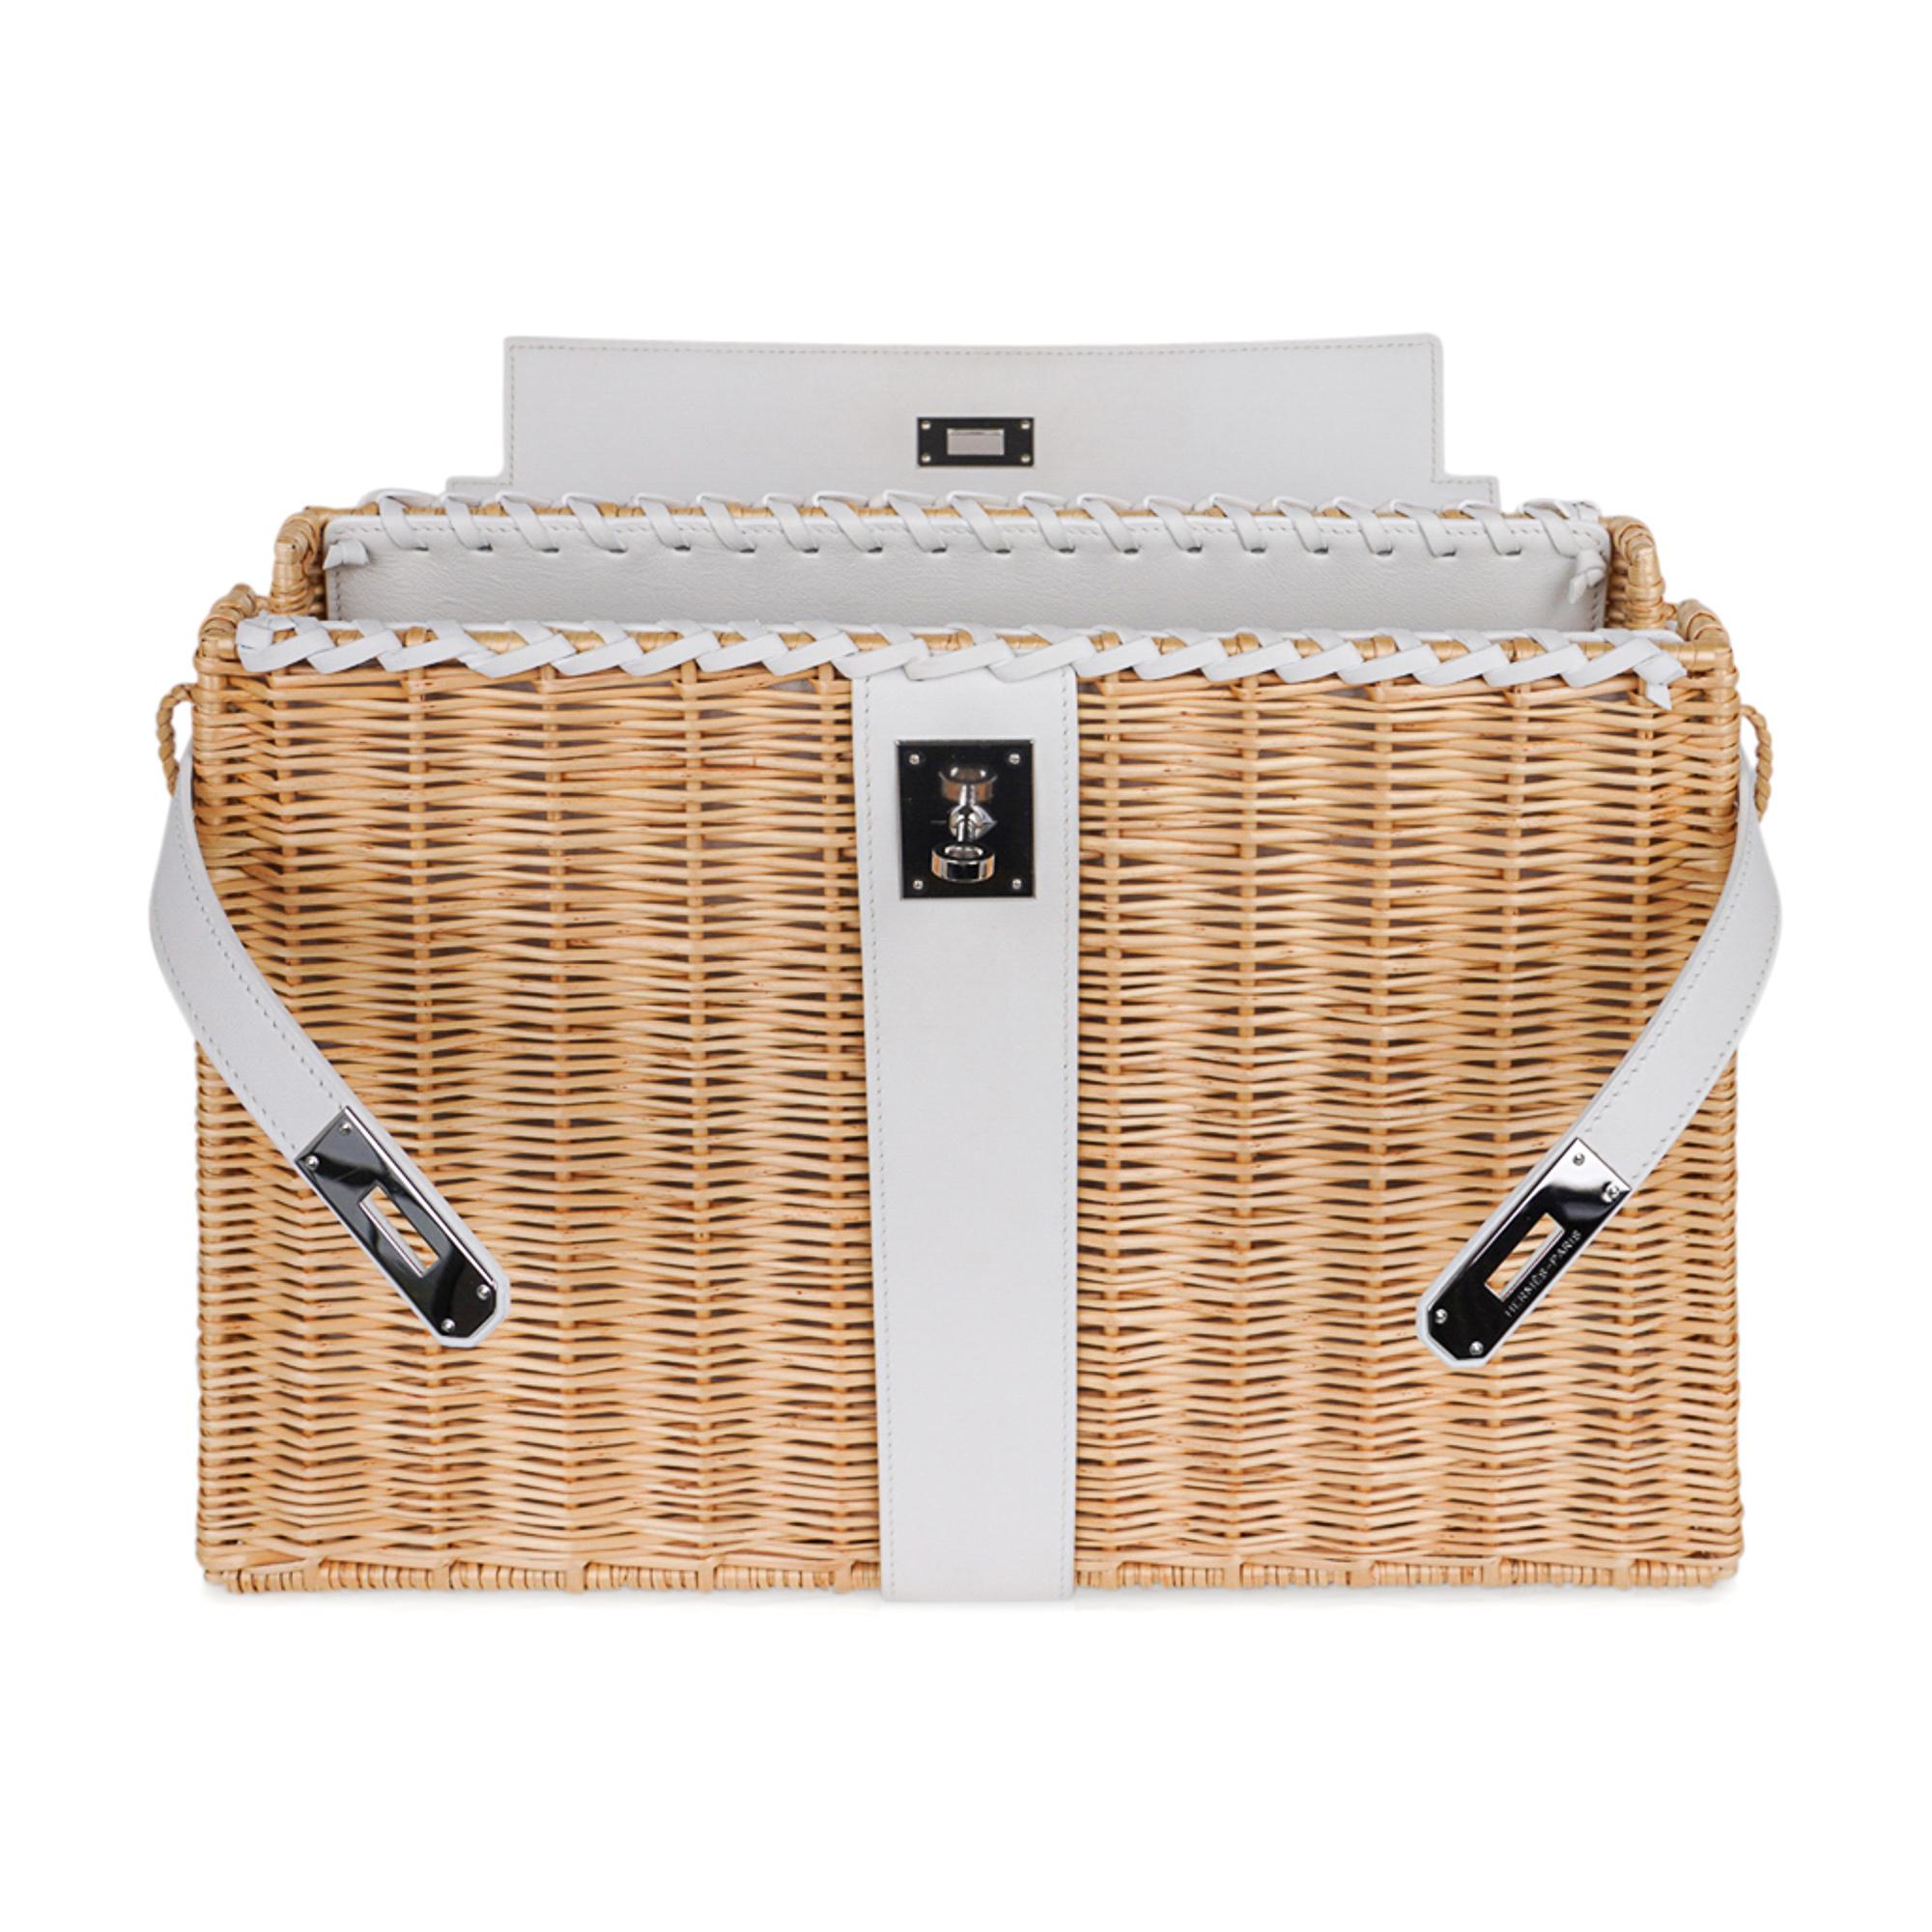 Hermes Kelly Picnic 35 Bag White Swift Leather / Osier (Wicker) Limited Edition 3